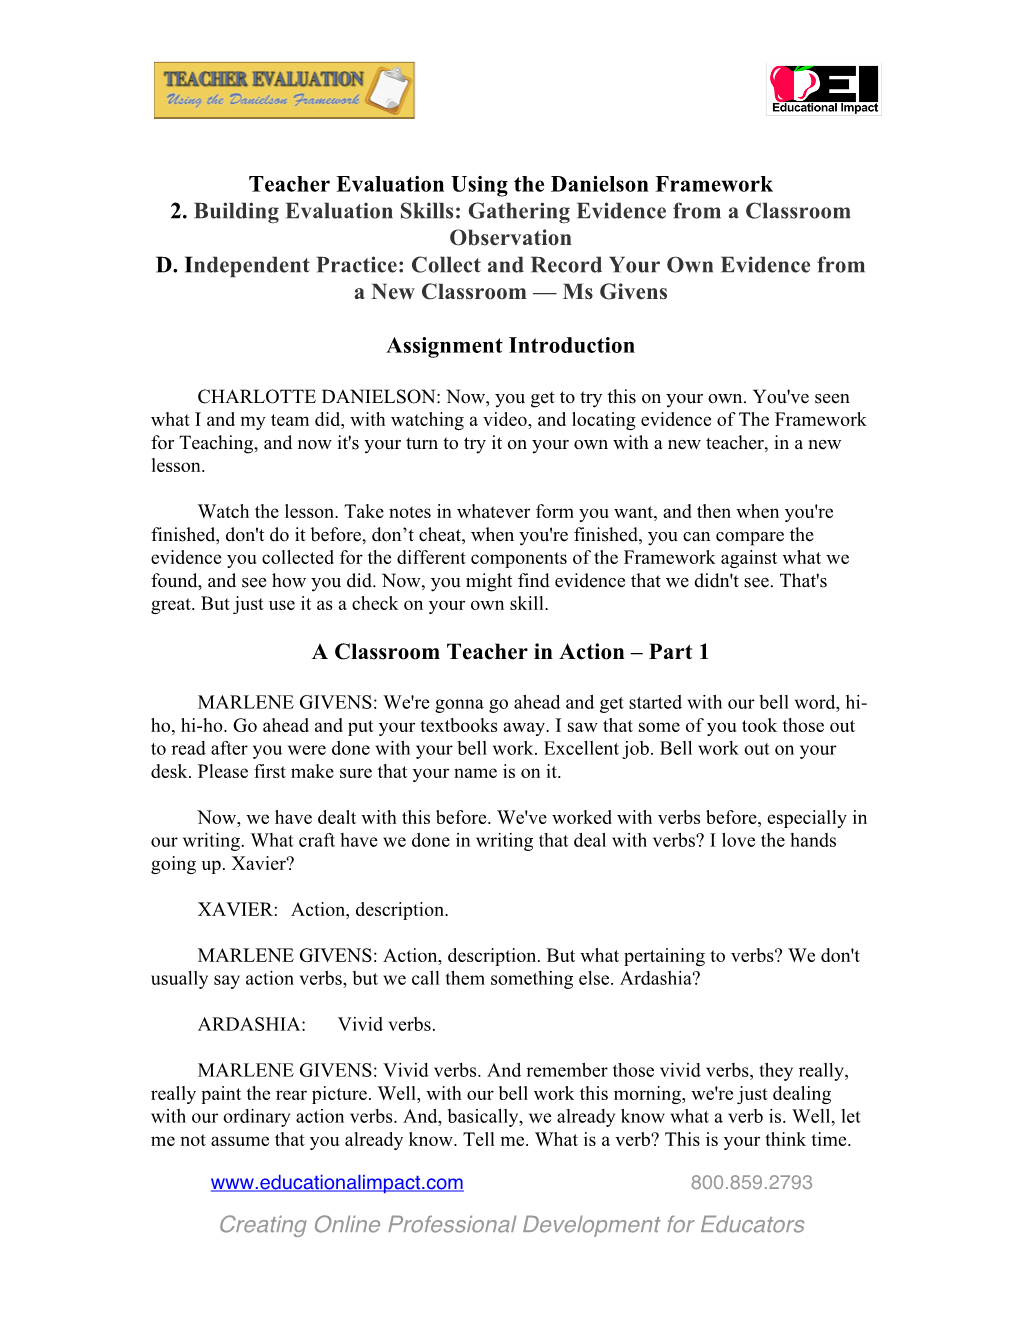 Teacher Evaluation Using the Danielson Framework 2. Building Evaluation Skills: Gathering Evidence from a Classroom Observation D